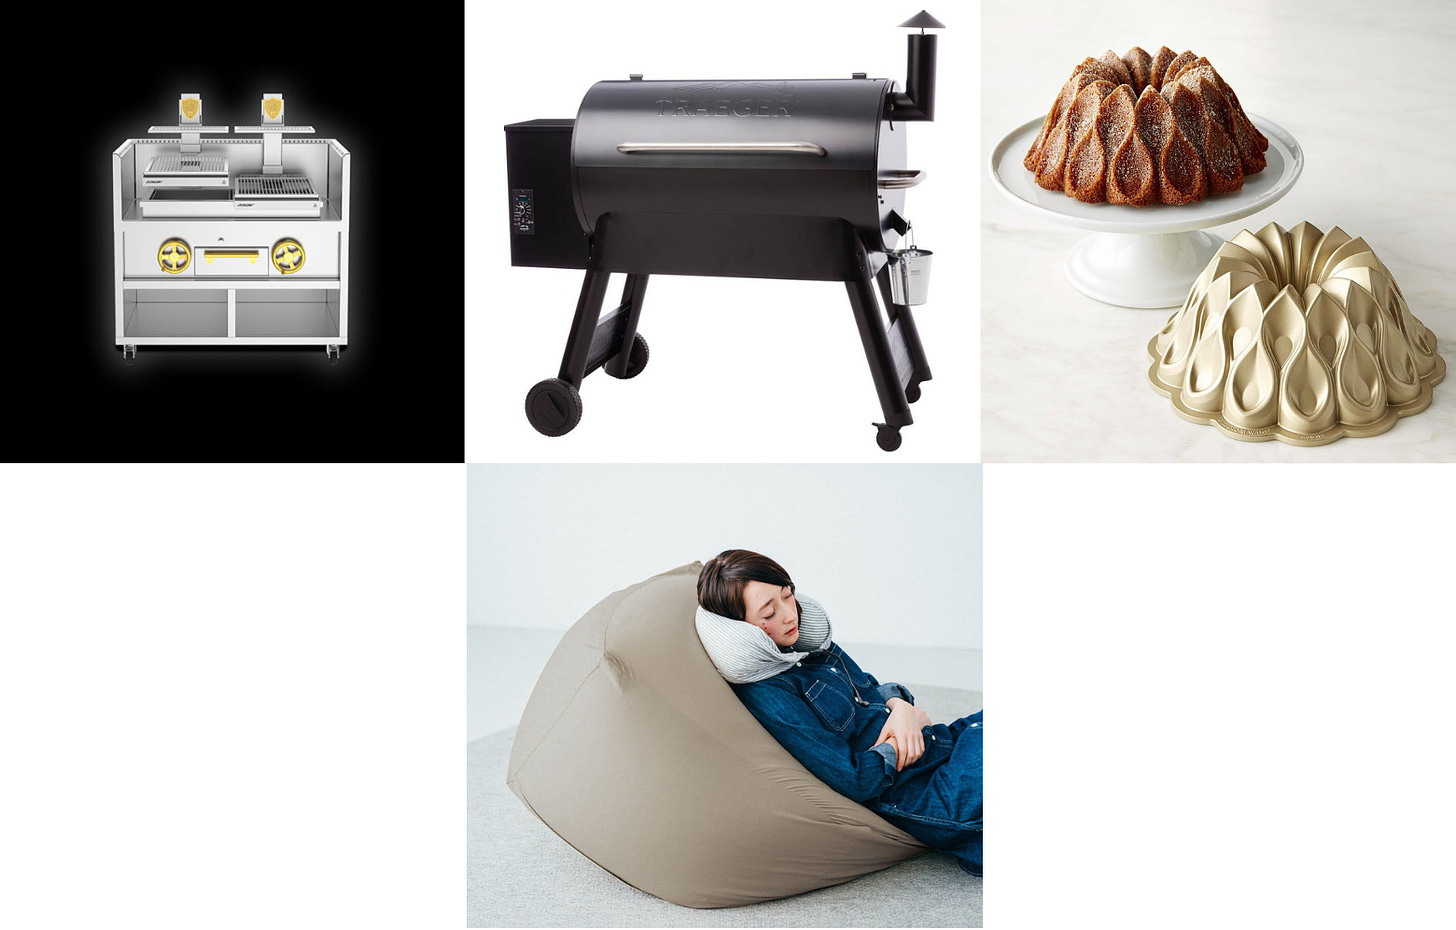 Clockwise from top left: A Josper Basque grill, a Traeger pellet-fed grill, a fancy Nordicware Cake pan, a Muji beanbag chair